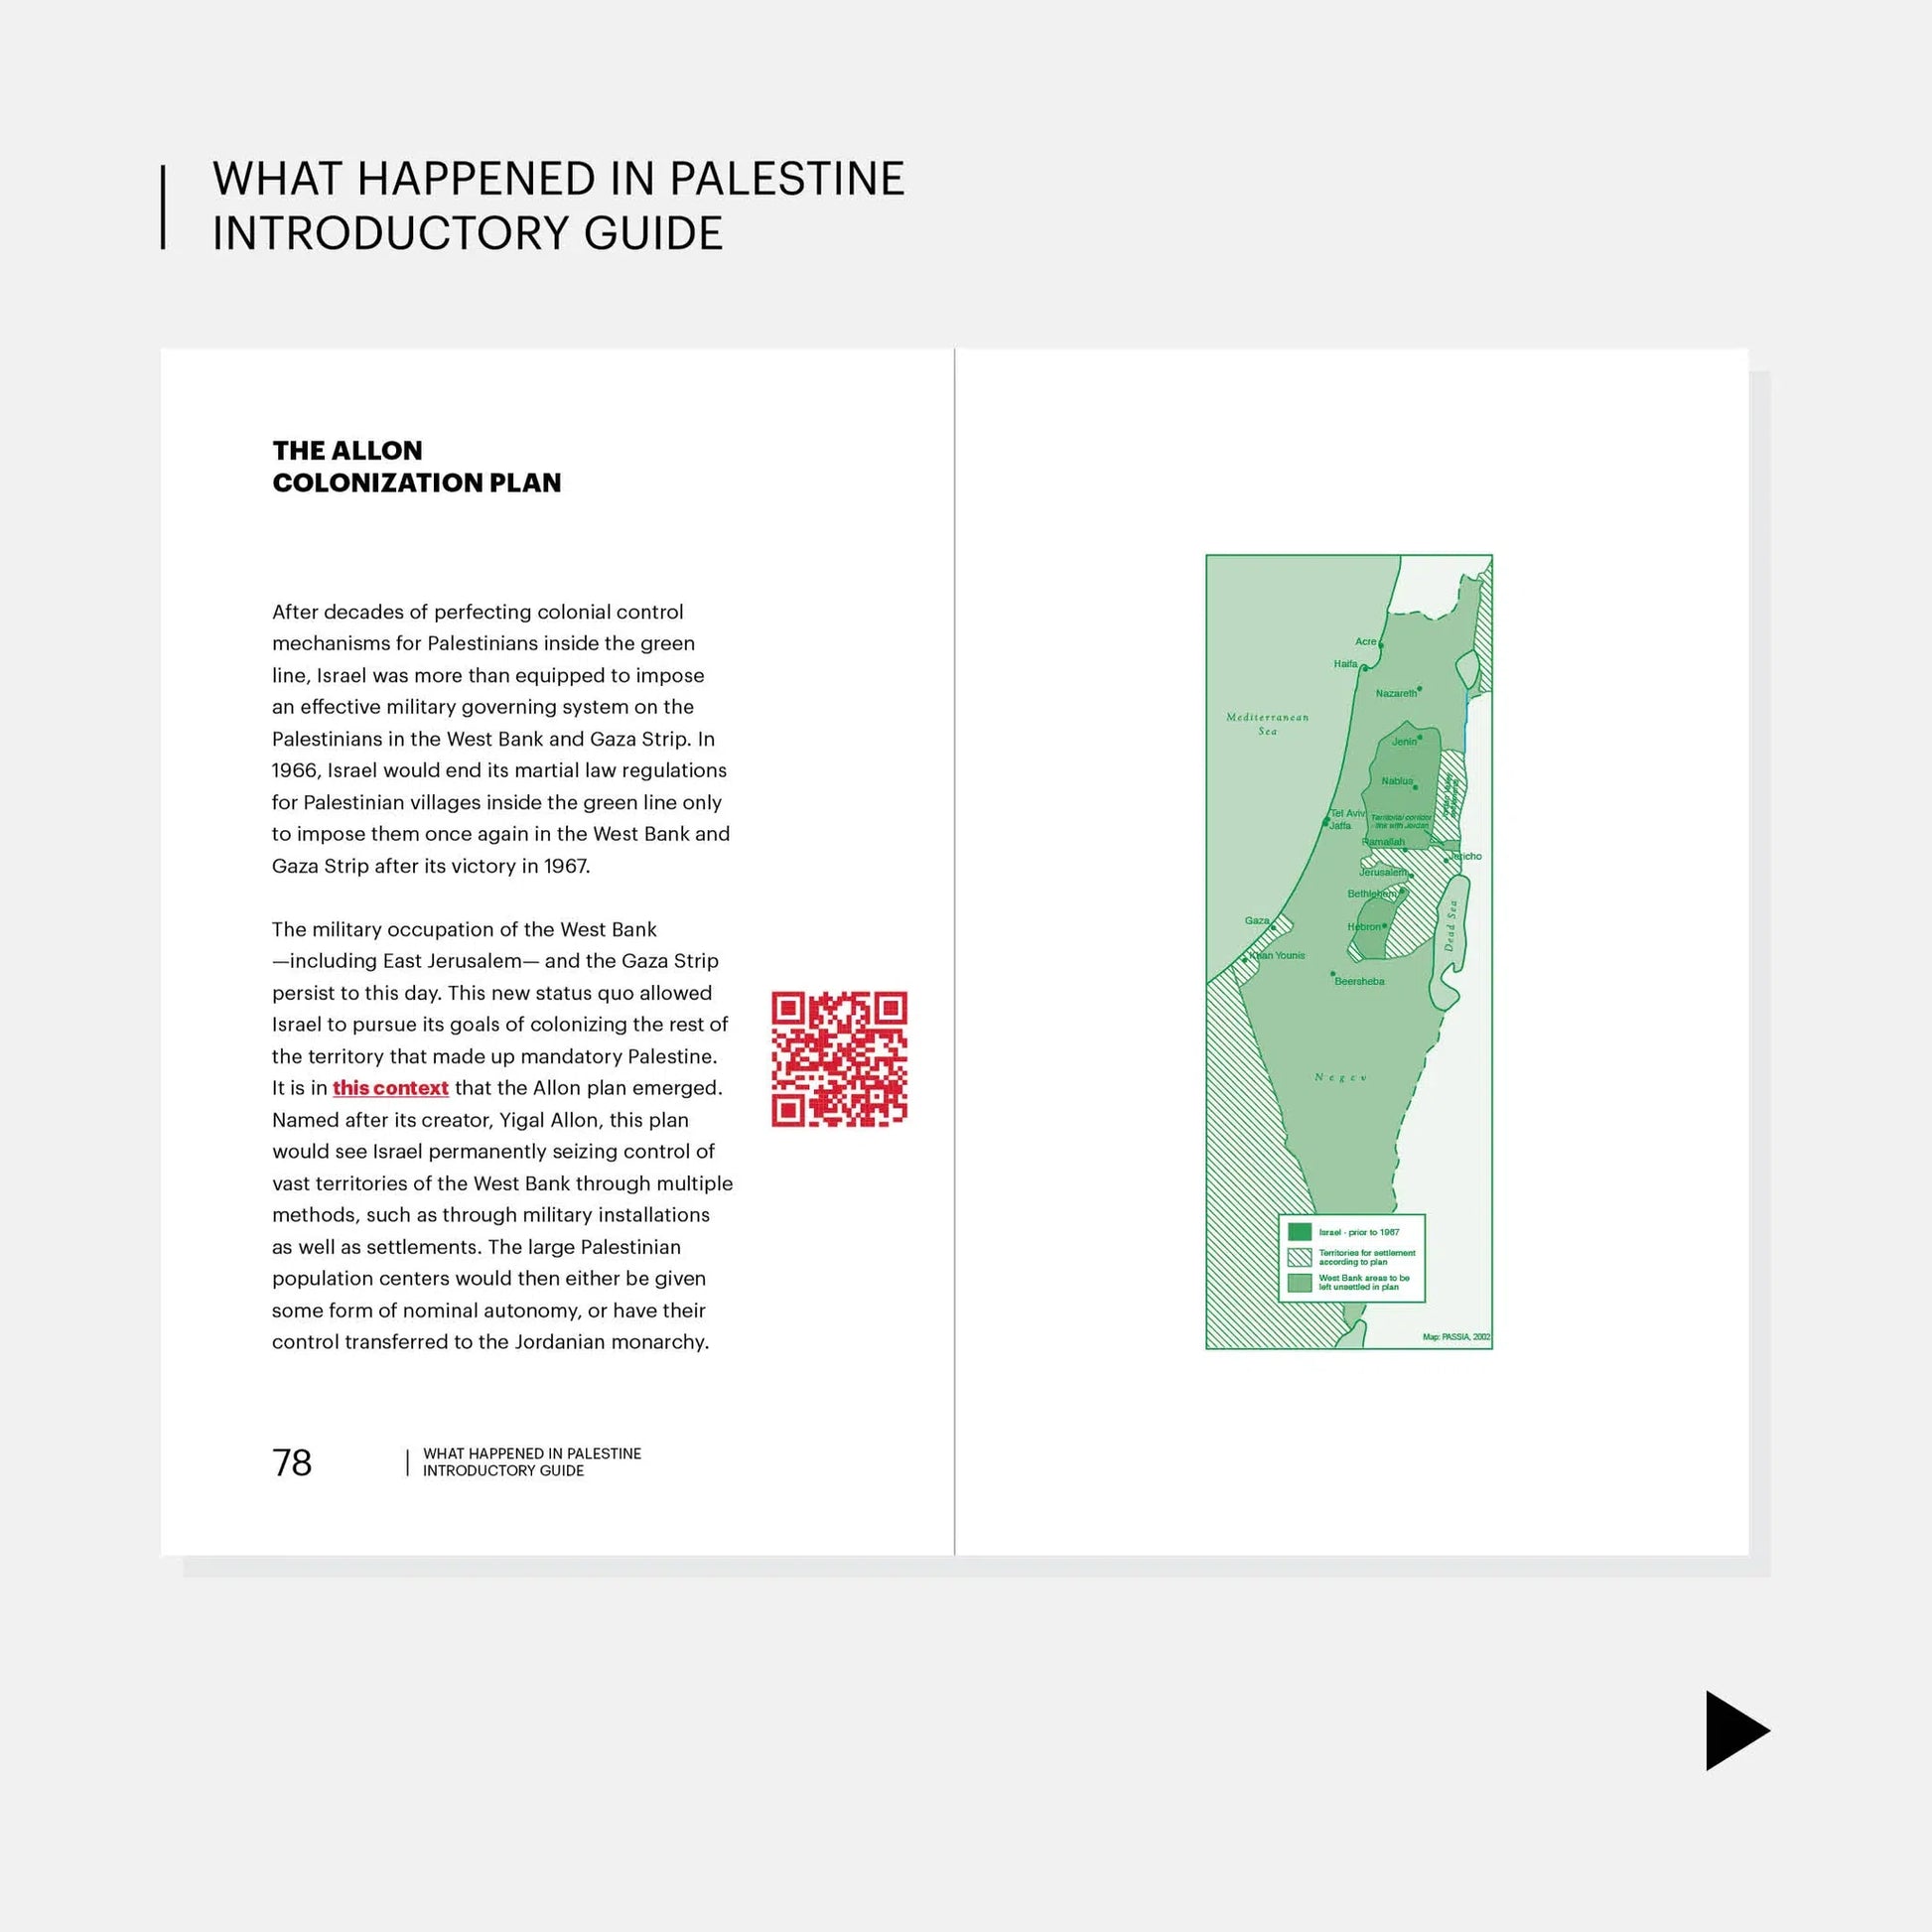 What Happened in Palestine Publication